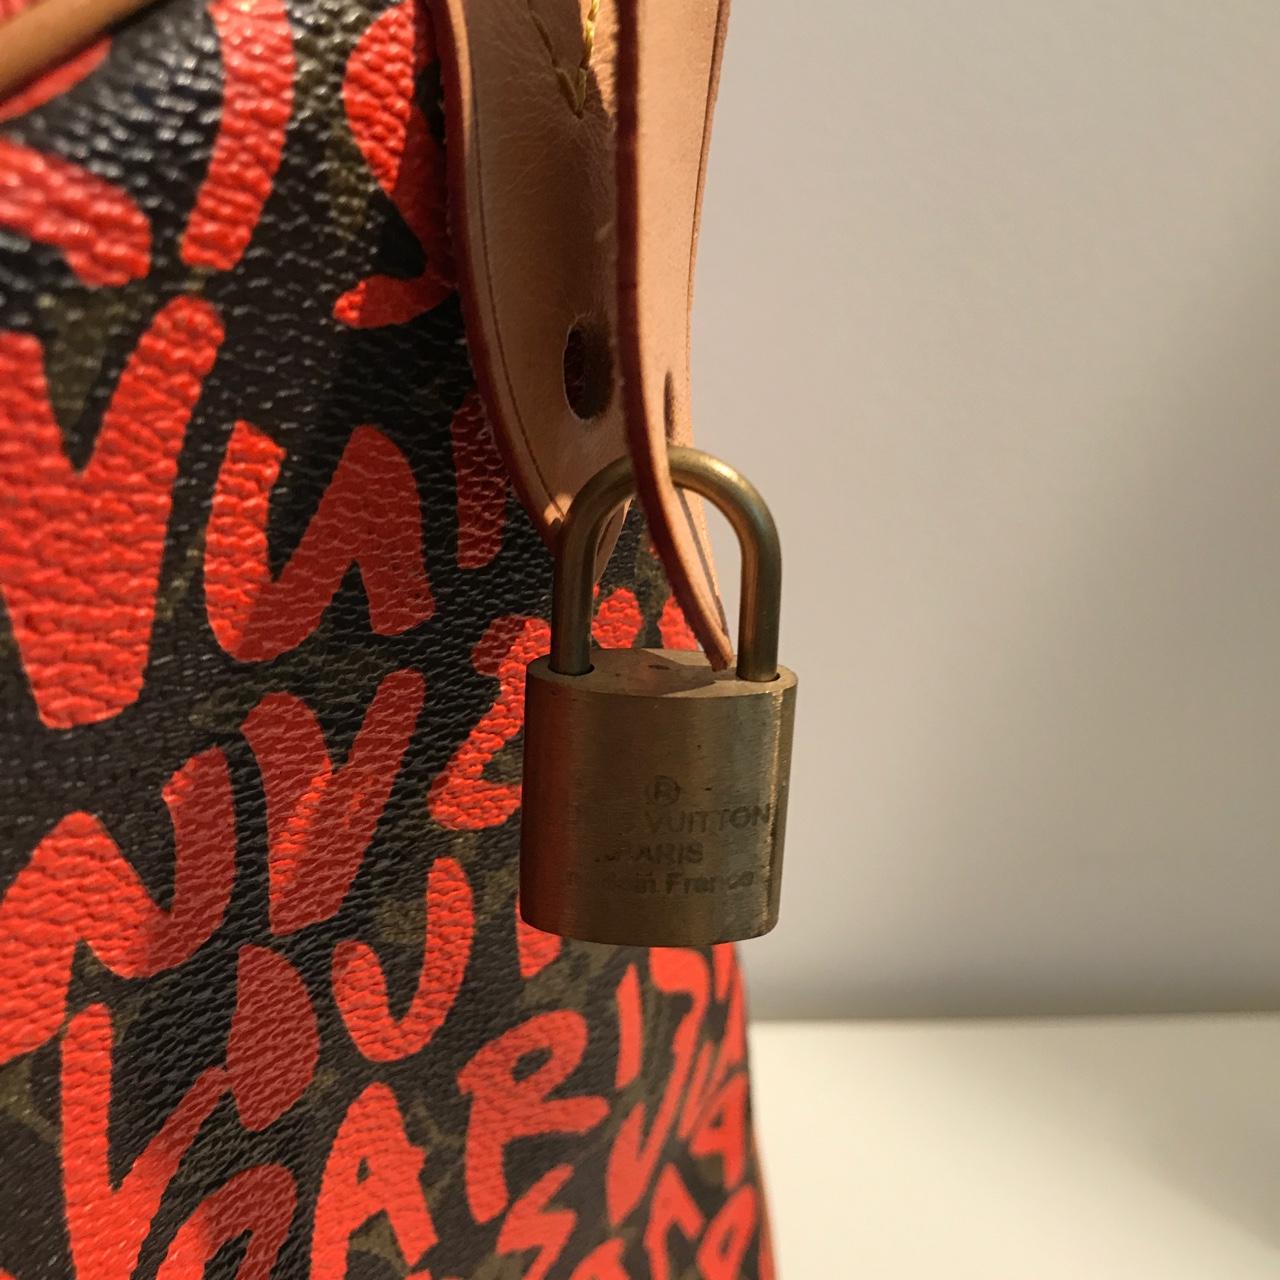 Louis Vuitton Limited Edition Stephen Sprouse - Depop